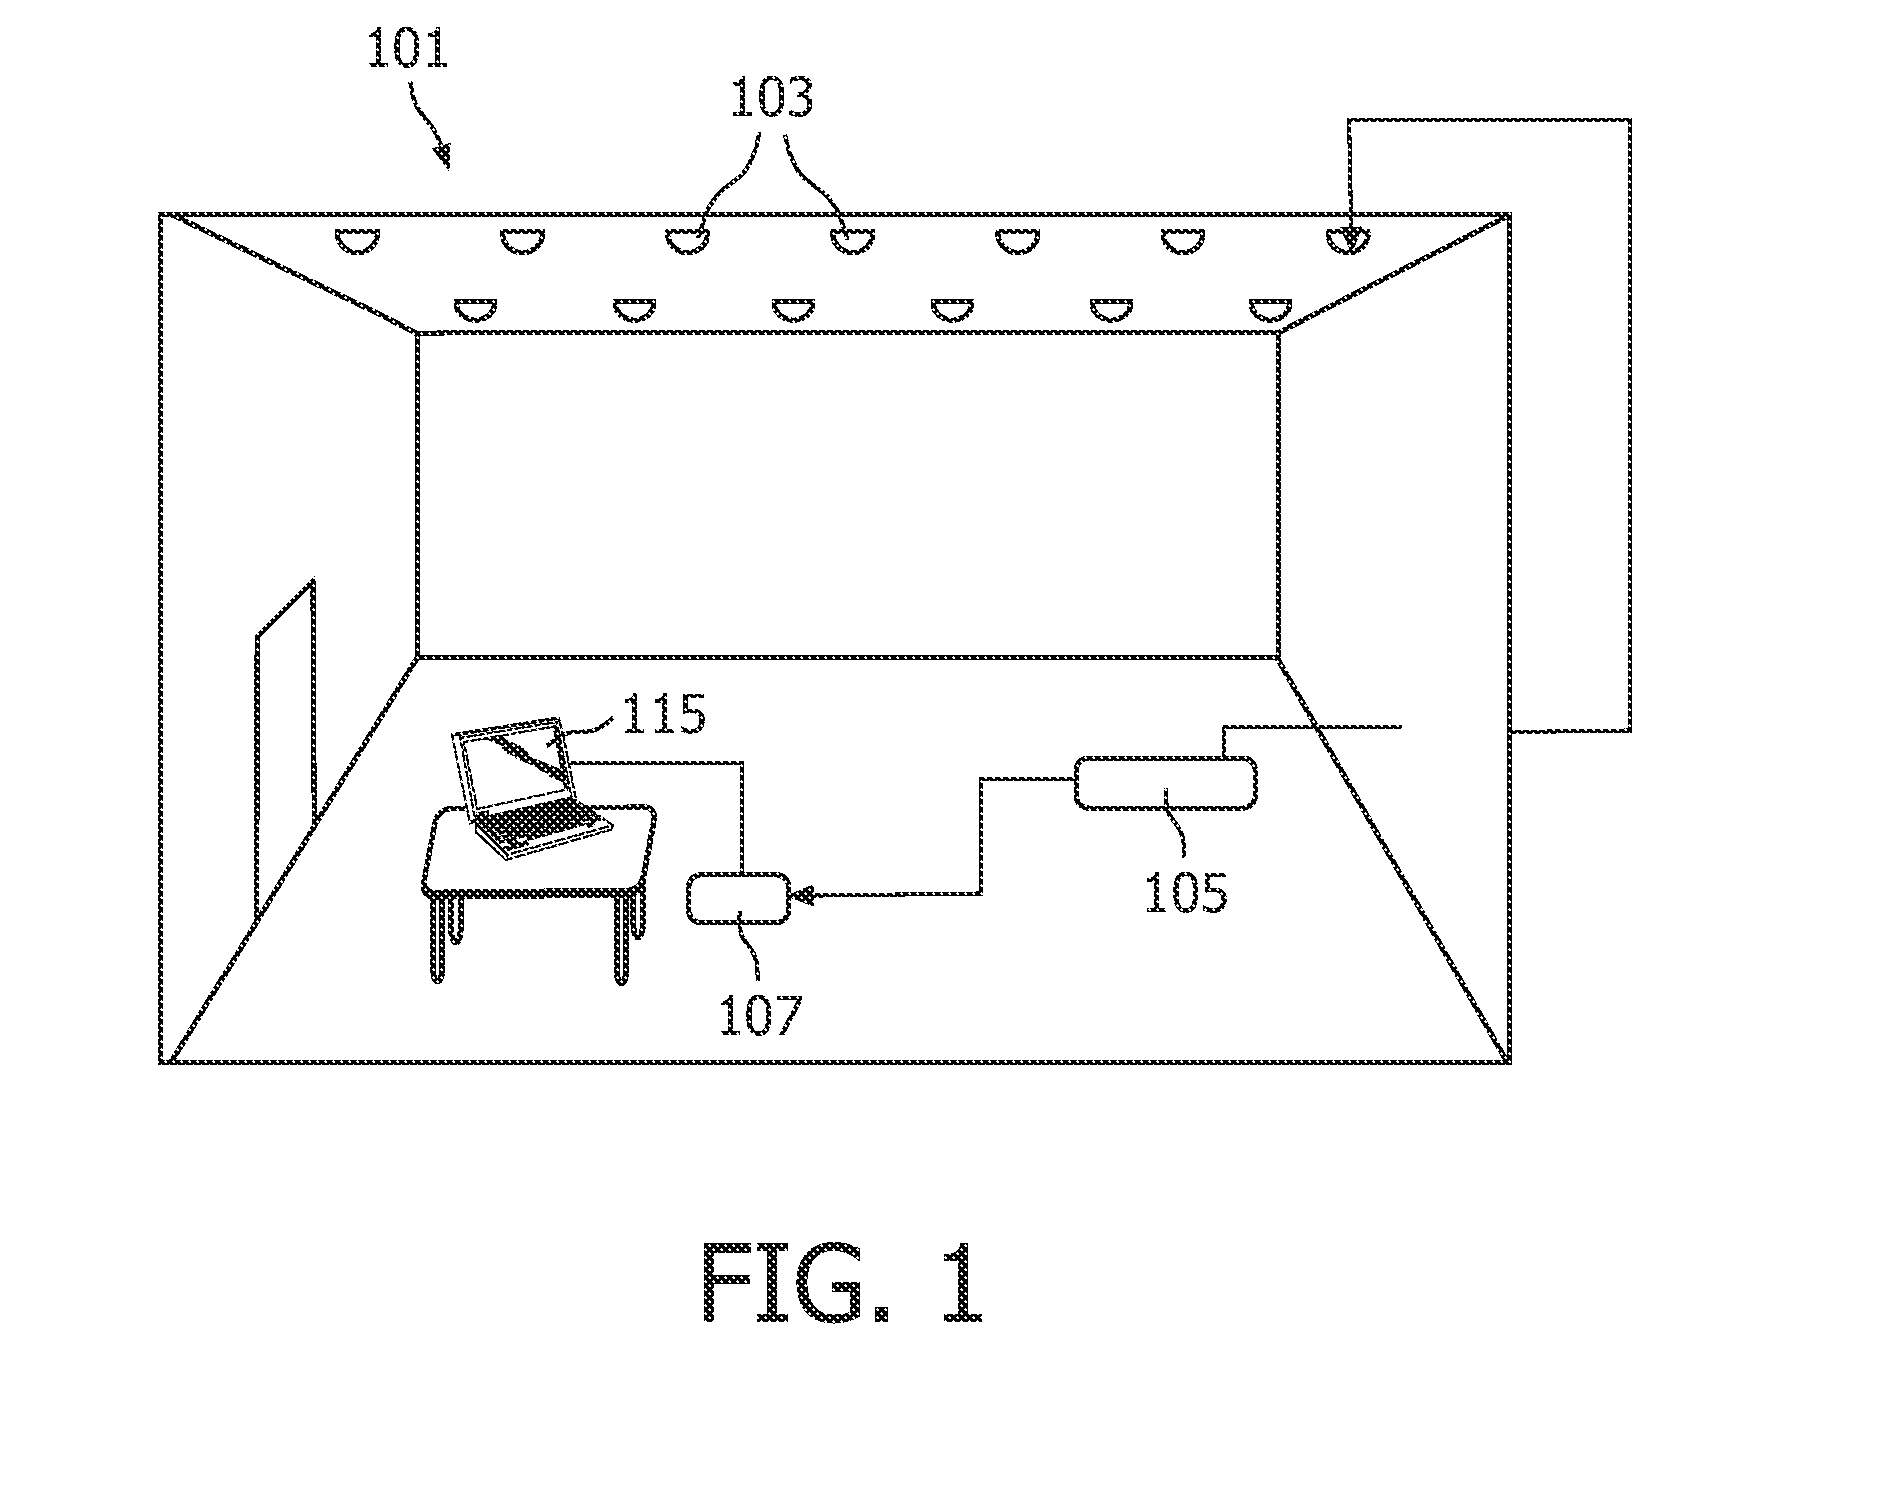 Method for determining the position of an object in a structure